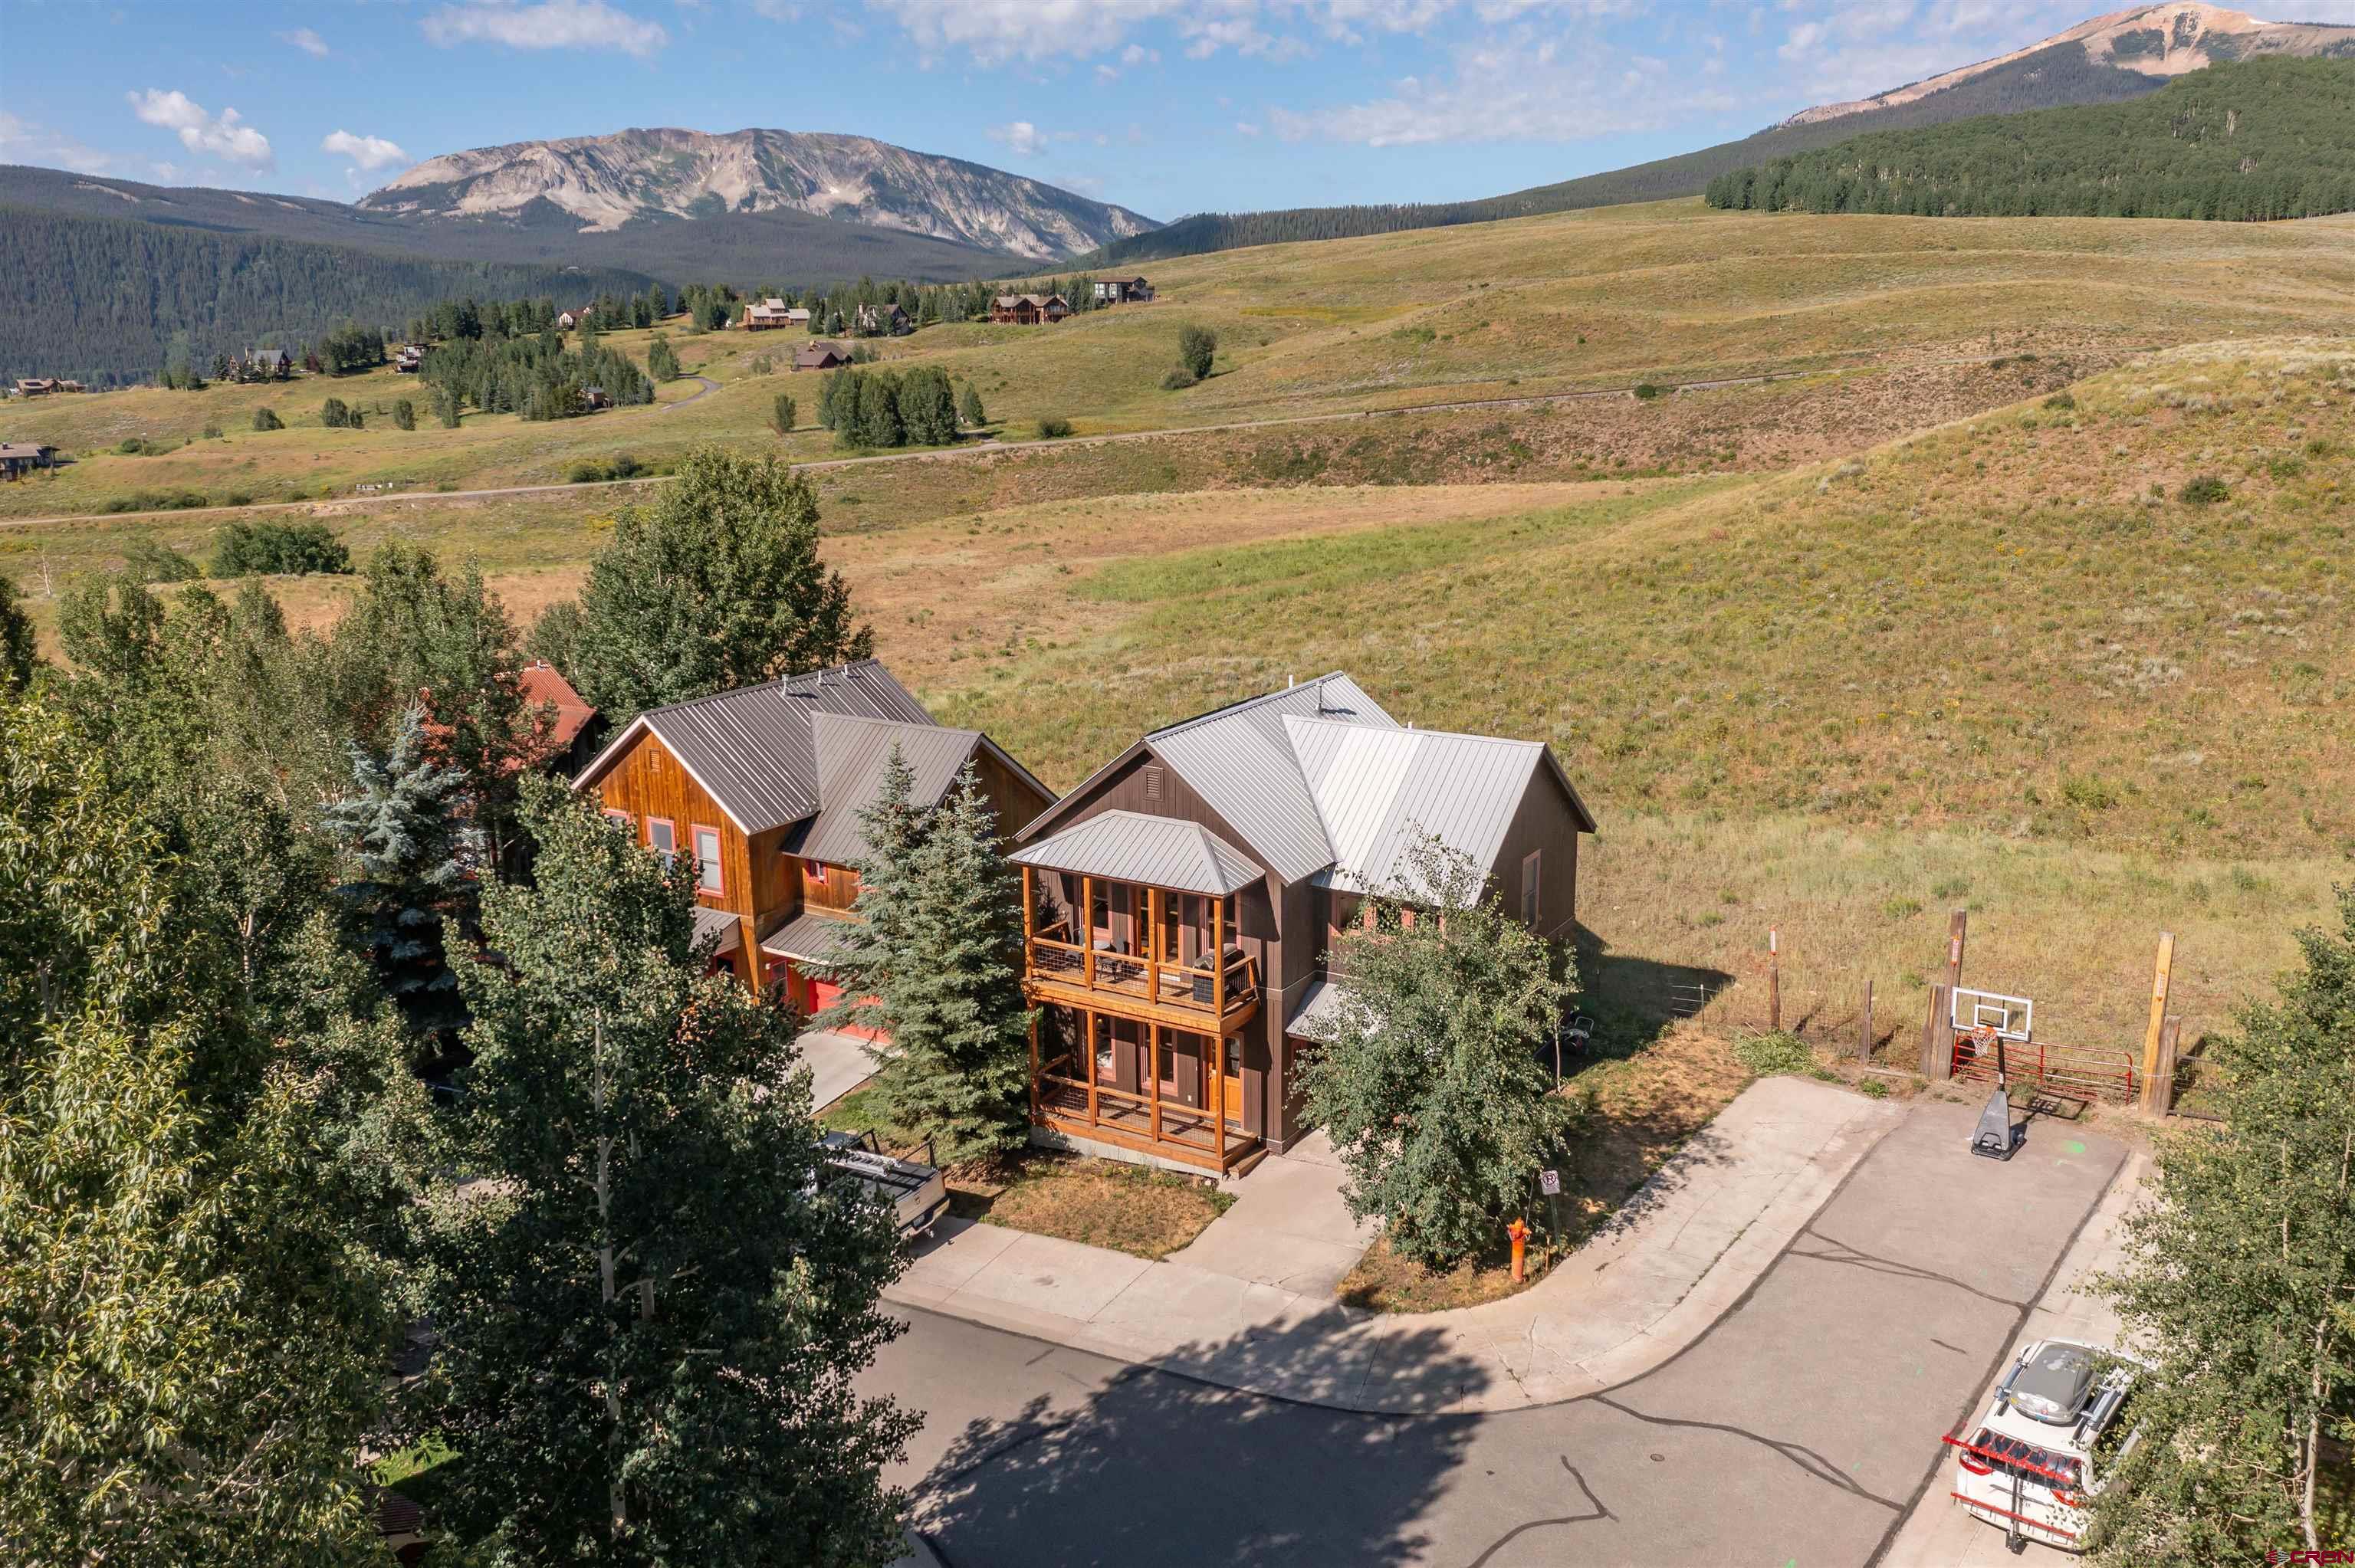 102 Horseshoe Drive, Mt. Crested Butte, CO 